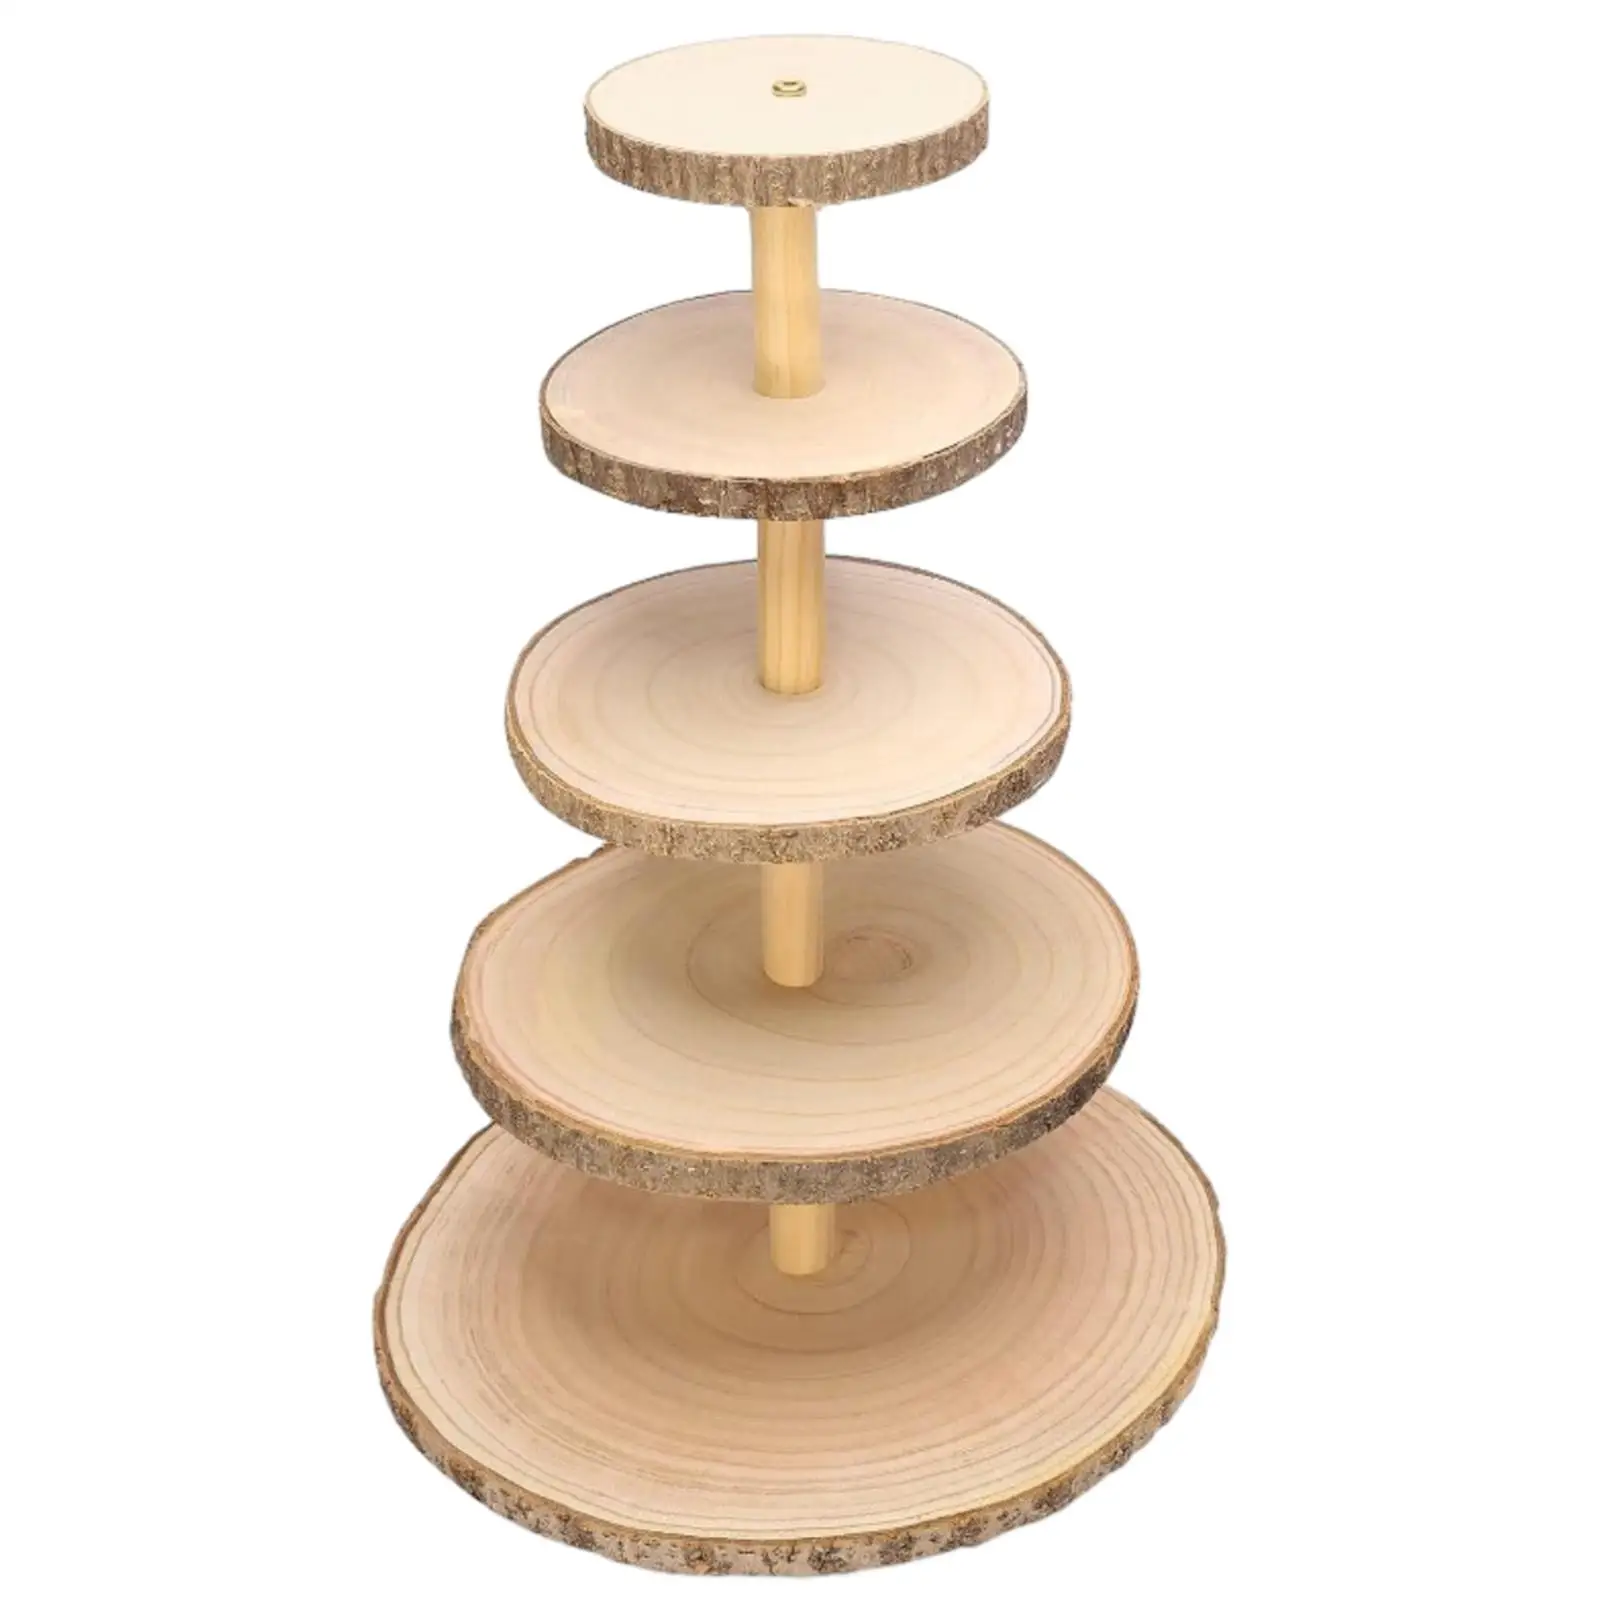 Detachable Wood Slices Round Cupcake Holder Wood Cupcake Stand for Wedding Centerpiece Home Parties Crafts Decoration